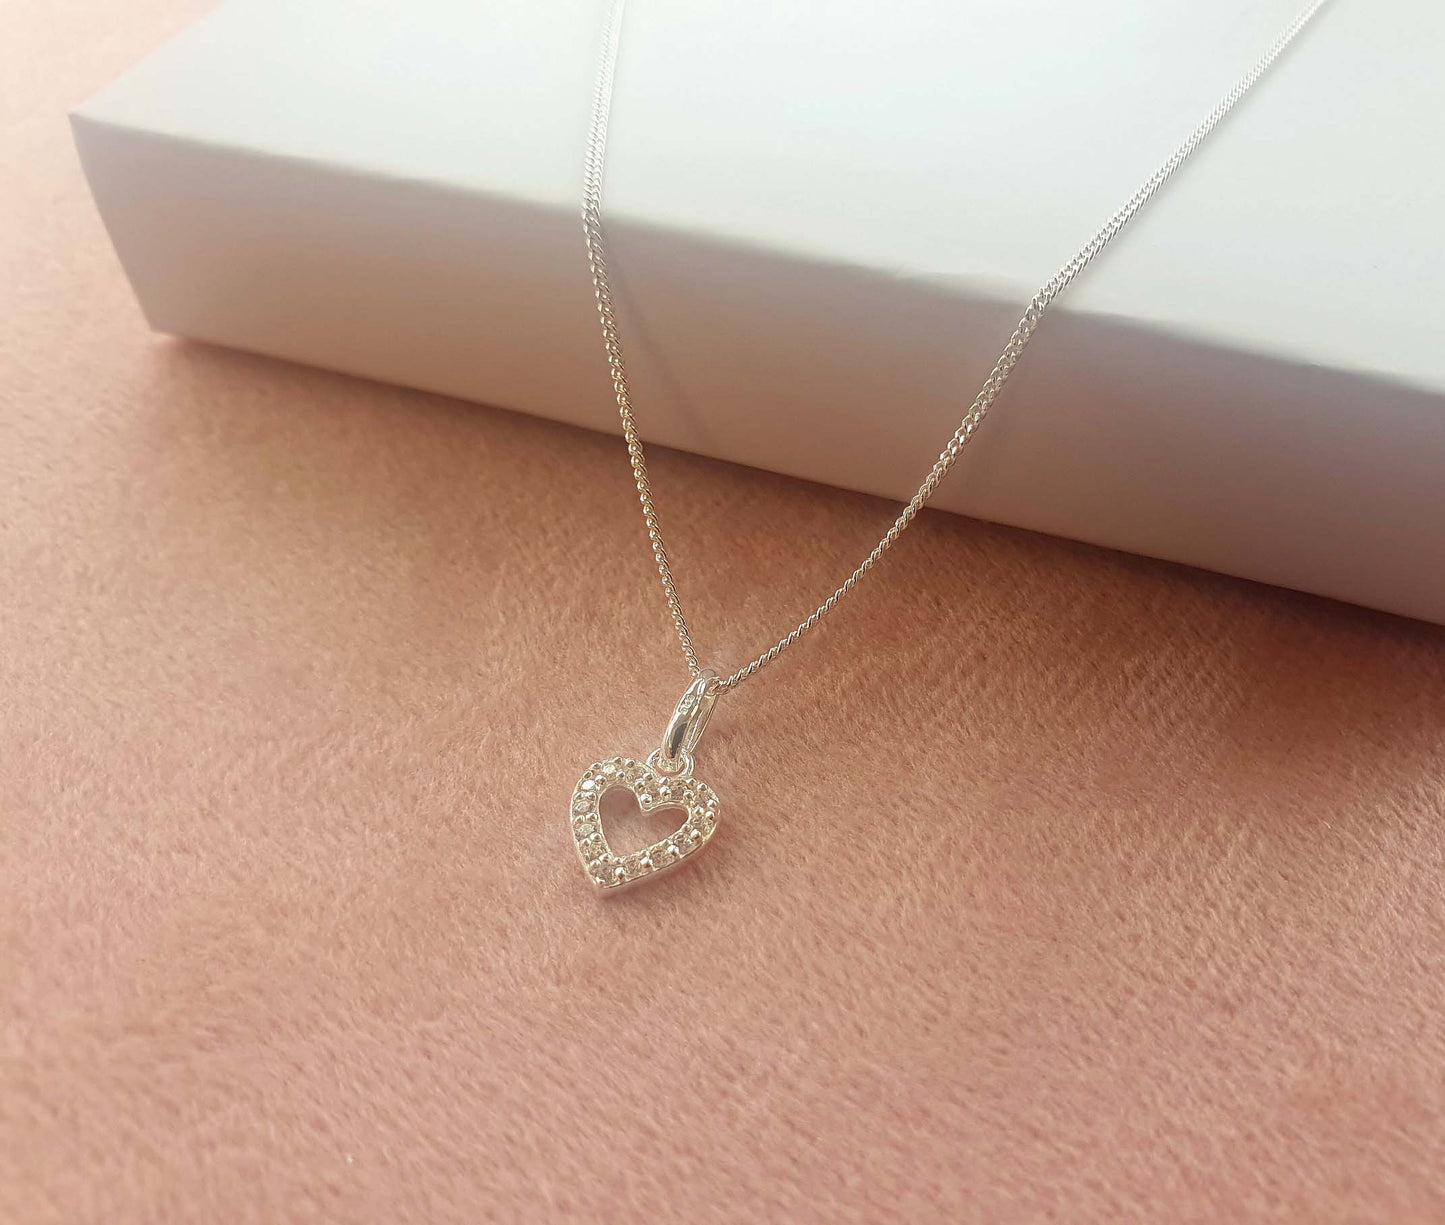 Mother of the Groom Heart Necklace with Cubic Zirconia in Sterling Silver 925, Personalised Gift